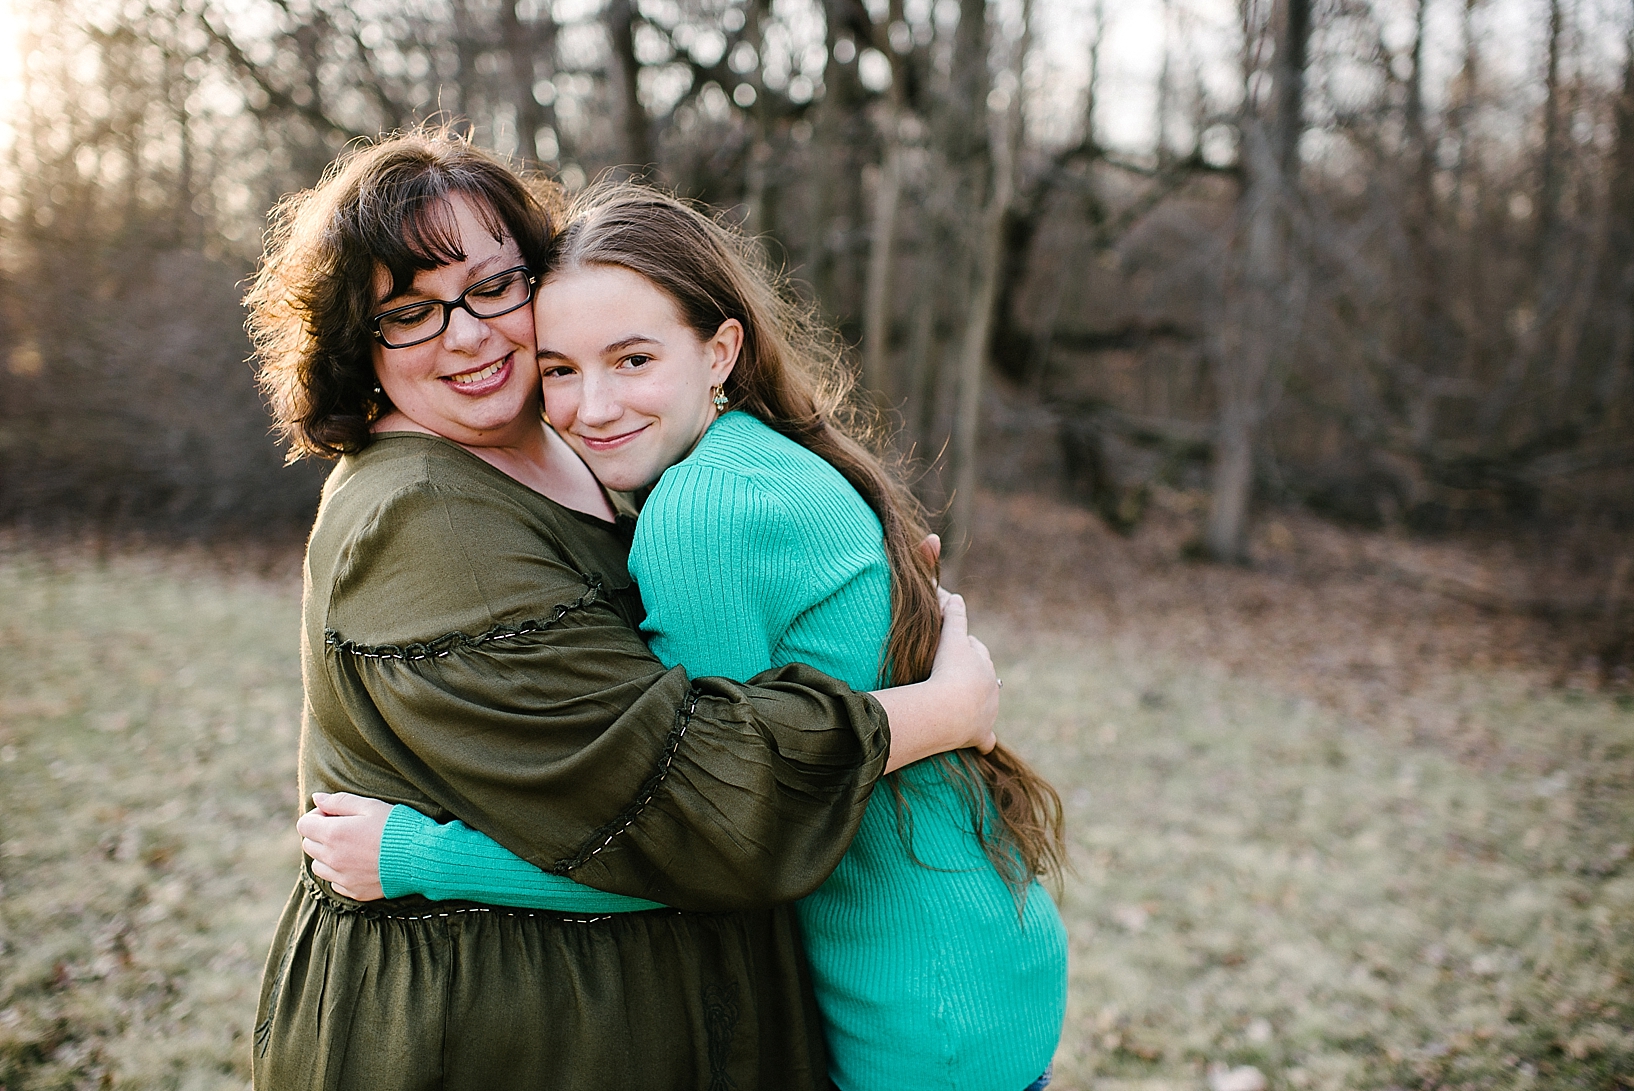 woman with short curly hair and glasses wearing green shirt hugging teen daughter with long brown hair